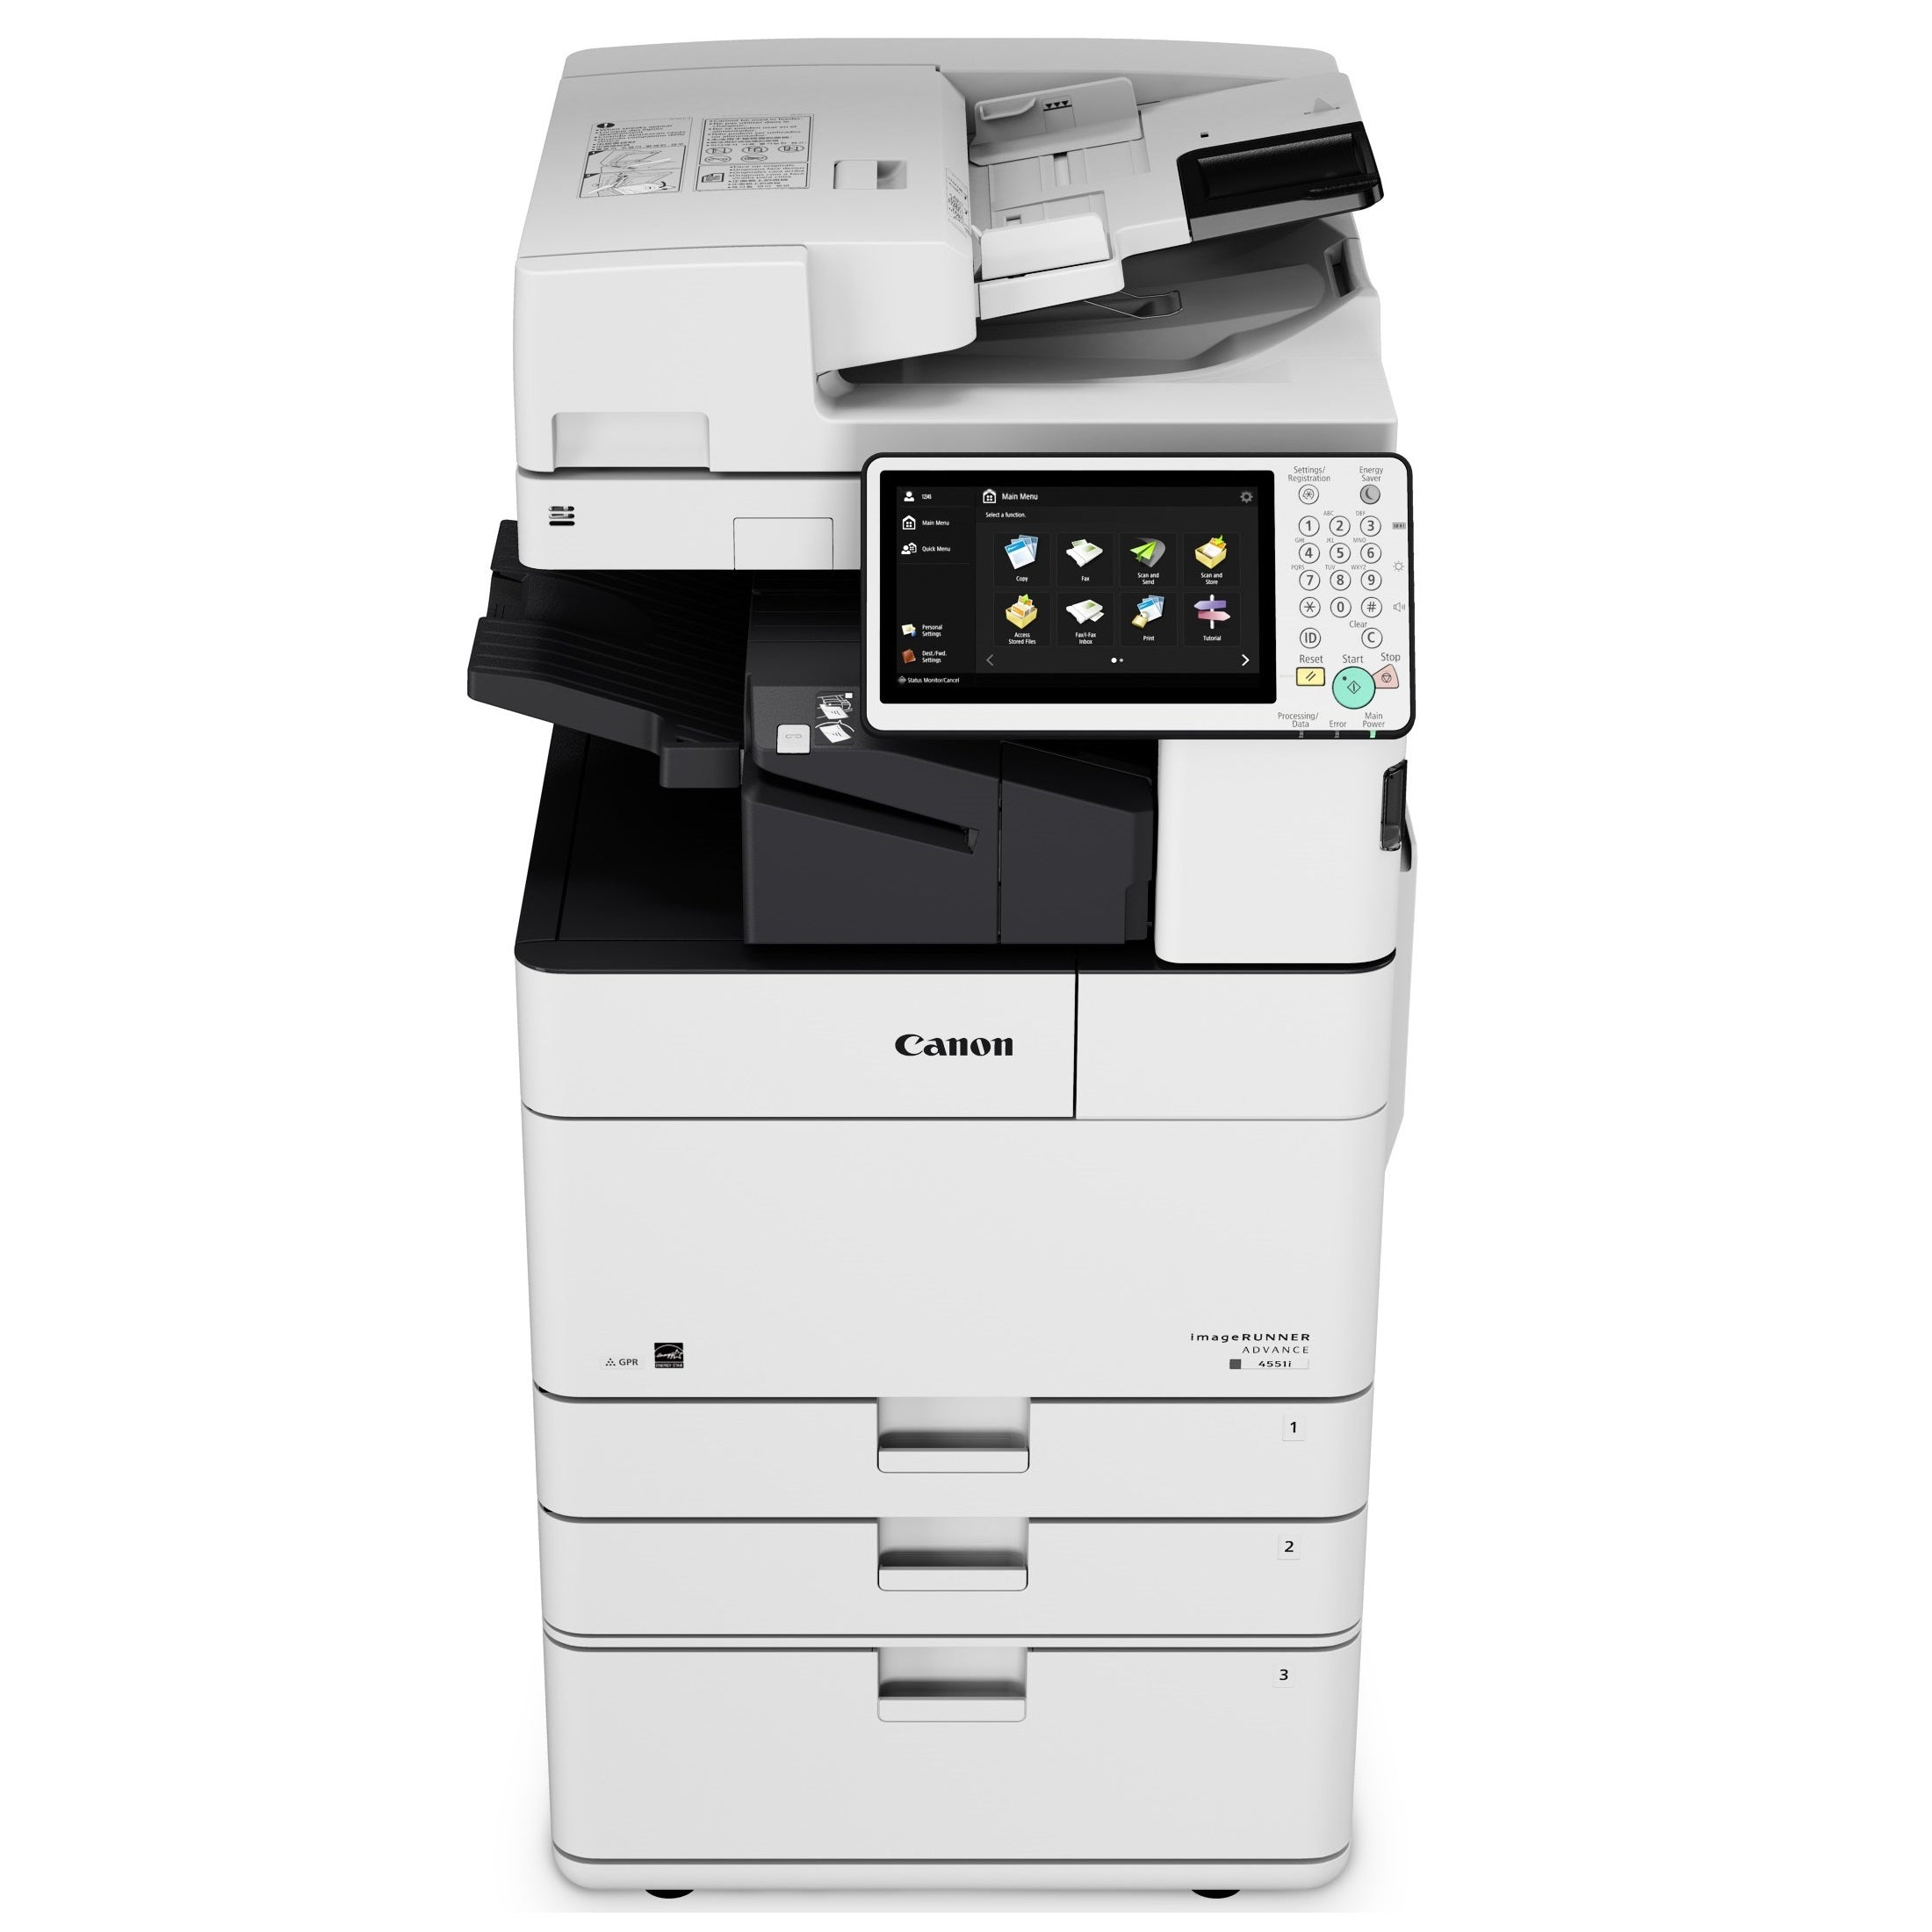 Absolute Toner $55.86/Month Canon imageRUNNER ADVANCE 4525i (IRA4525i) Monochrome Multifunction Laser Printer/Copier Color Scanner With Supports Paper Sizes Upto 11 x 17 Printers/Copiers